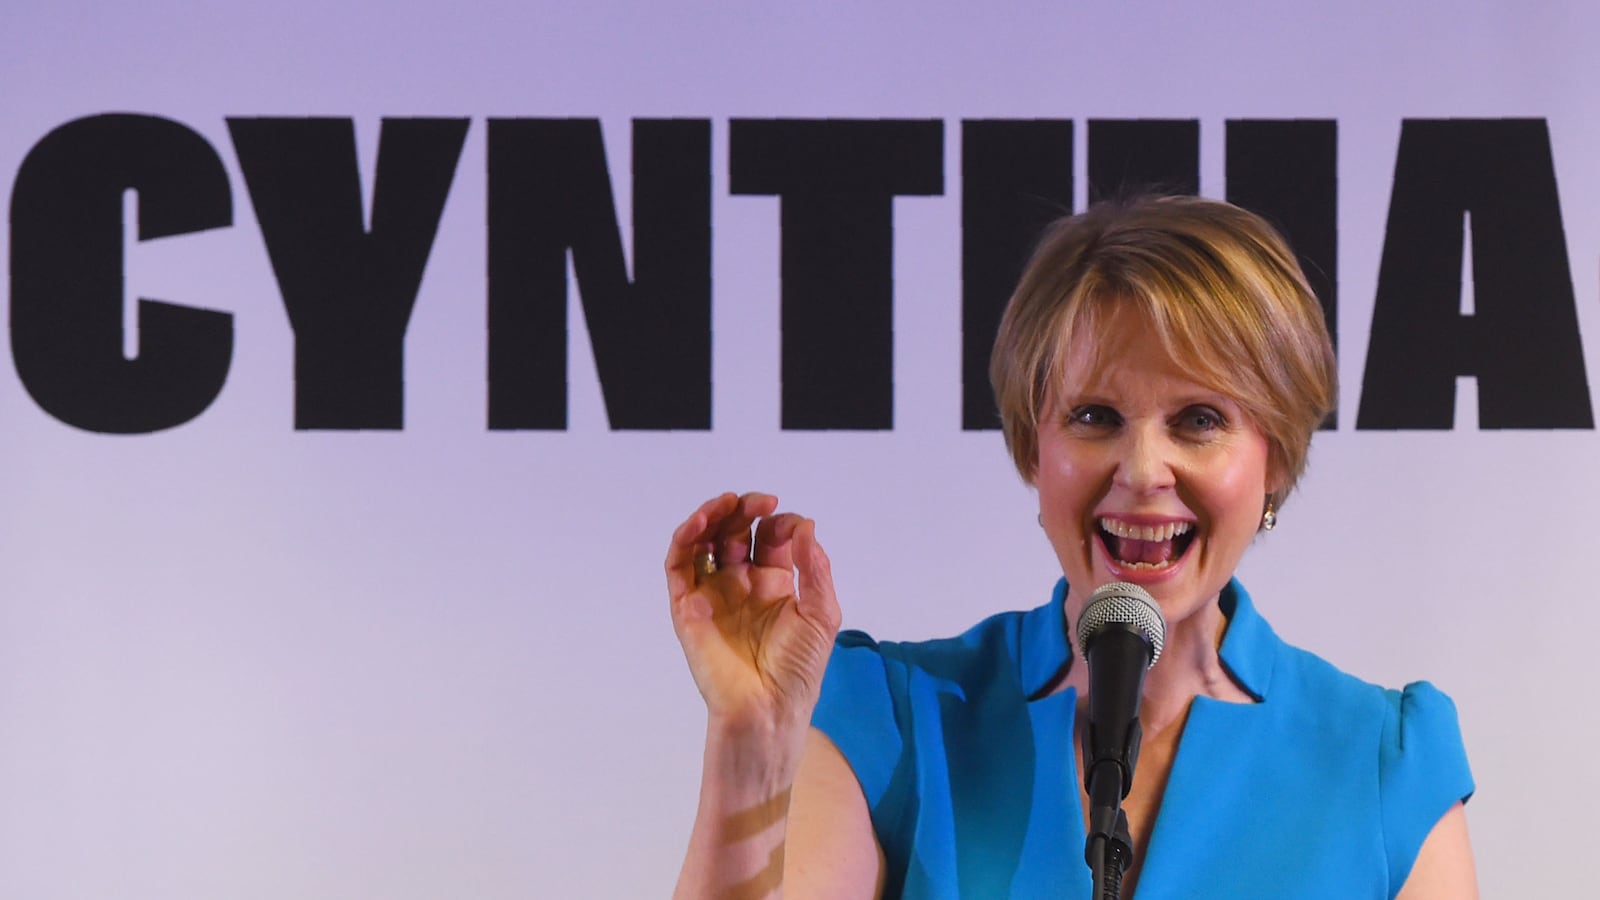 Former Sex and the City star Cynthia Nixon speaks to people at the Bethesda Healing Center in  Brooklyn, New York on March 20, 2018 at her first event since announcing that shes running for governor of New York.